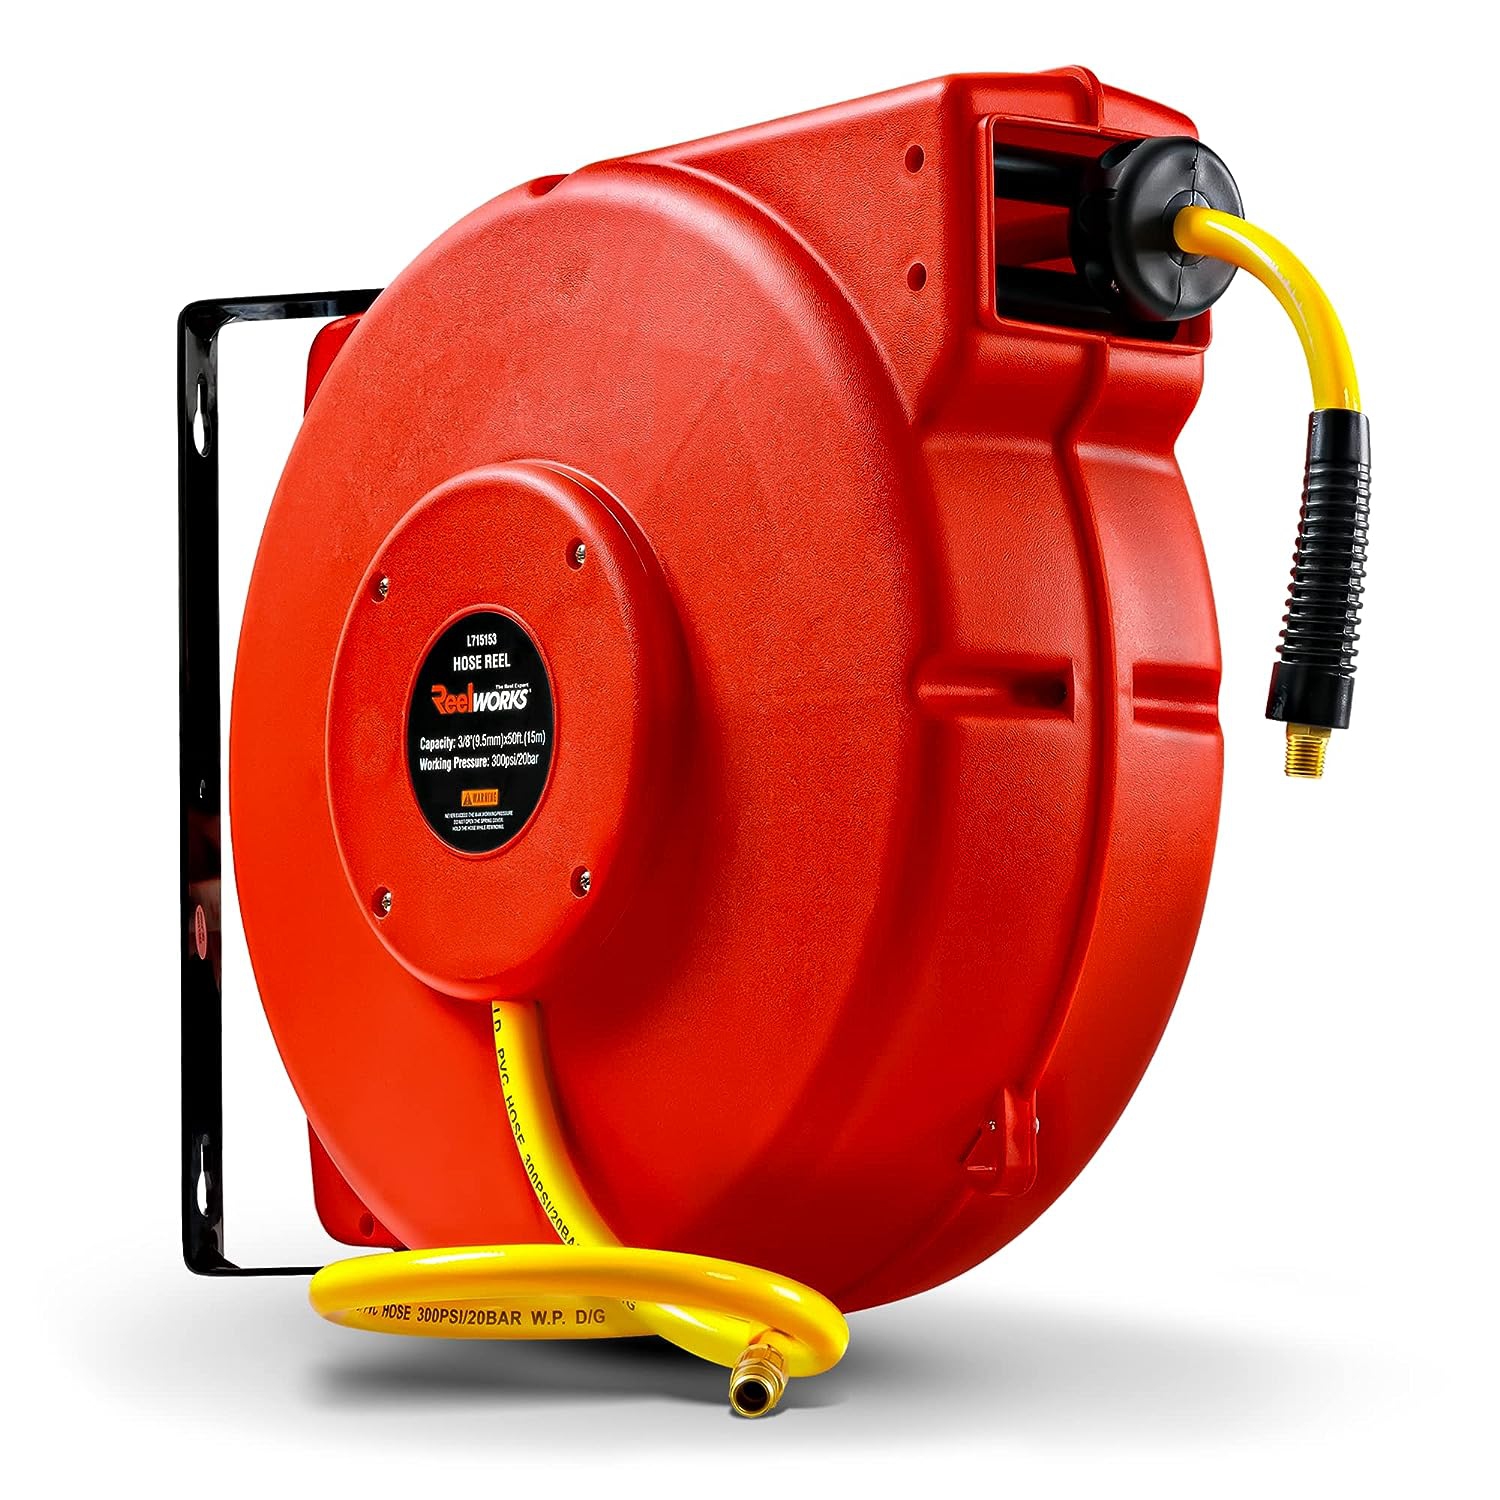 ReelWorks Retractable Hose Reel: 9.5mm x 15m Premium Flex Hybrid Polymer, Max 300 PSI, Heavy-Duty Polypropylene, Industrial Spring-Driven for Air & Water